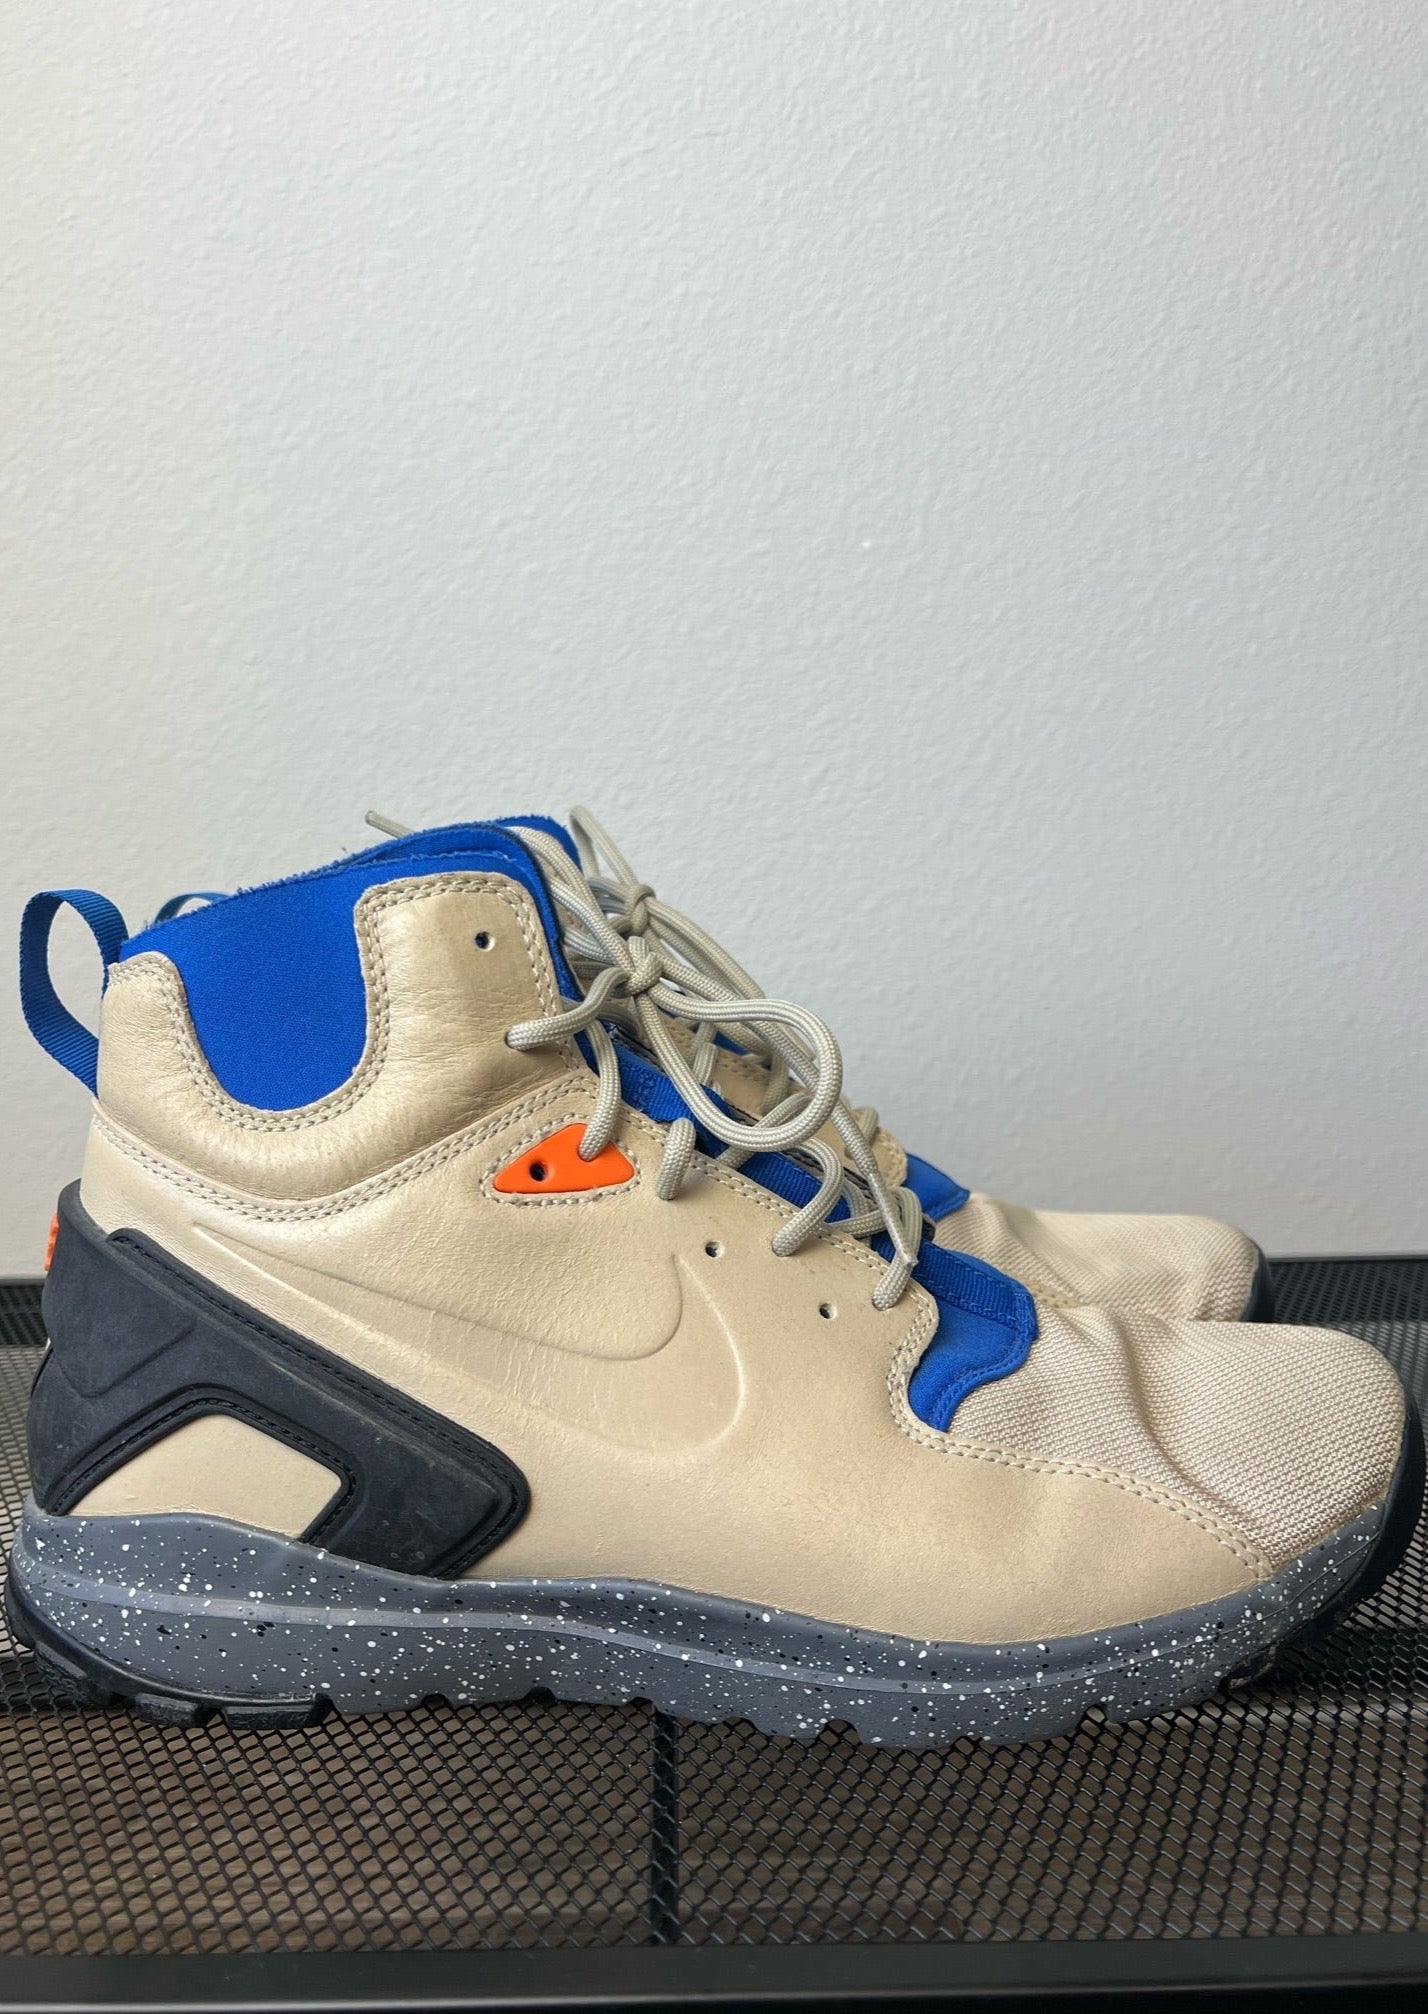 Retro ACG Boots By Nike